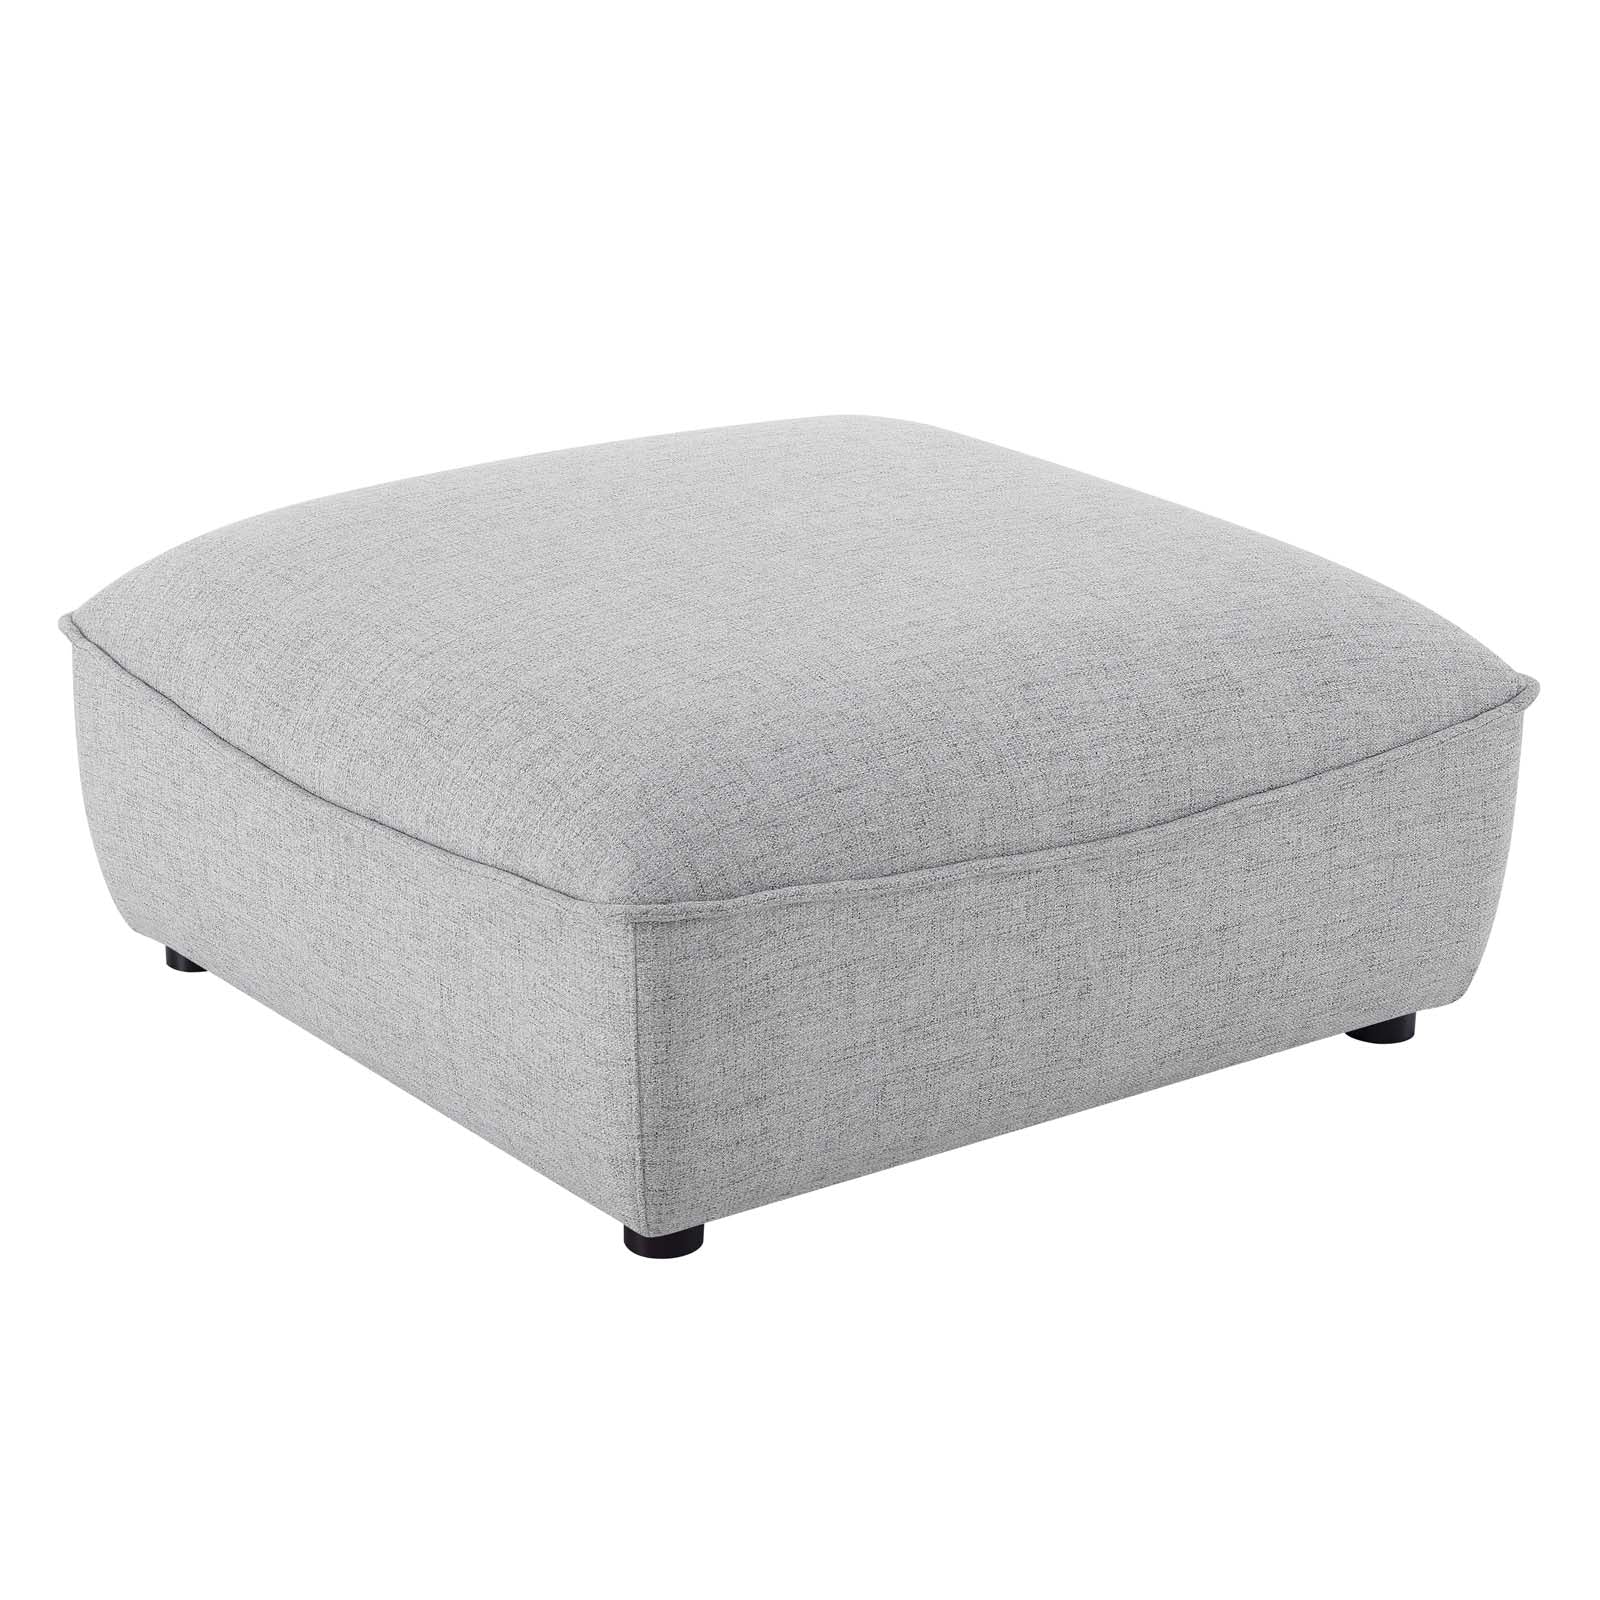 Modway Ottomans & Stools - Comprise Sectional Sofa Ottoman Light Gray